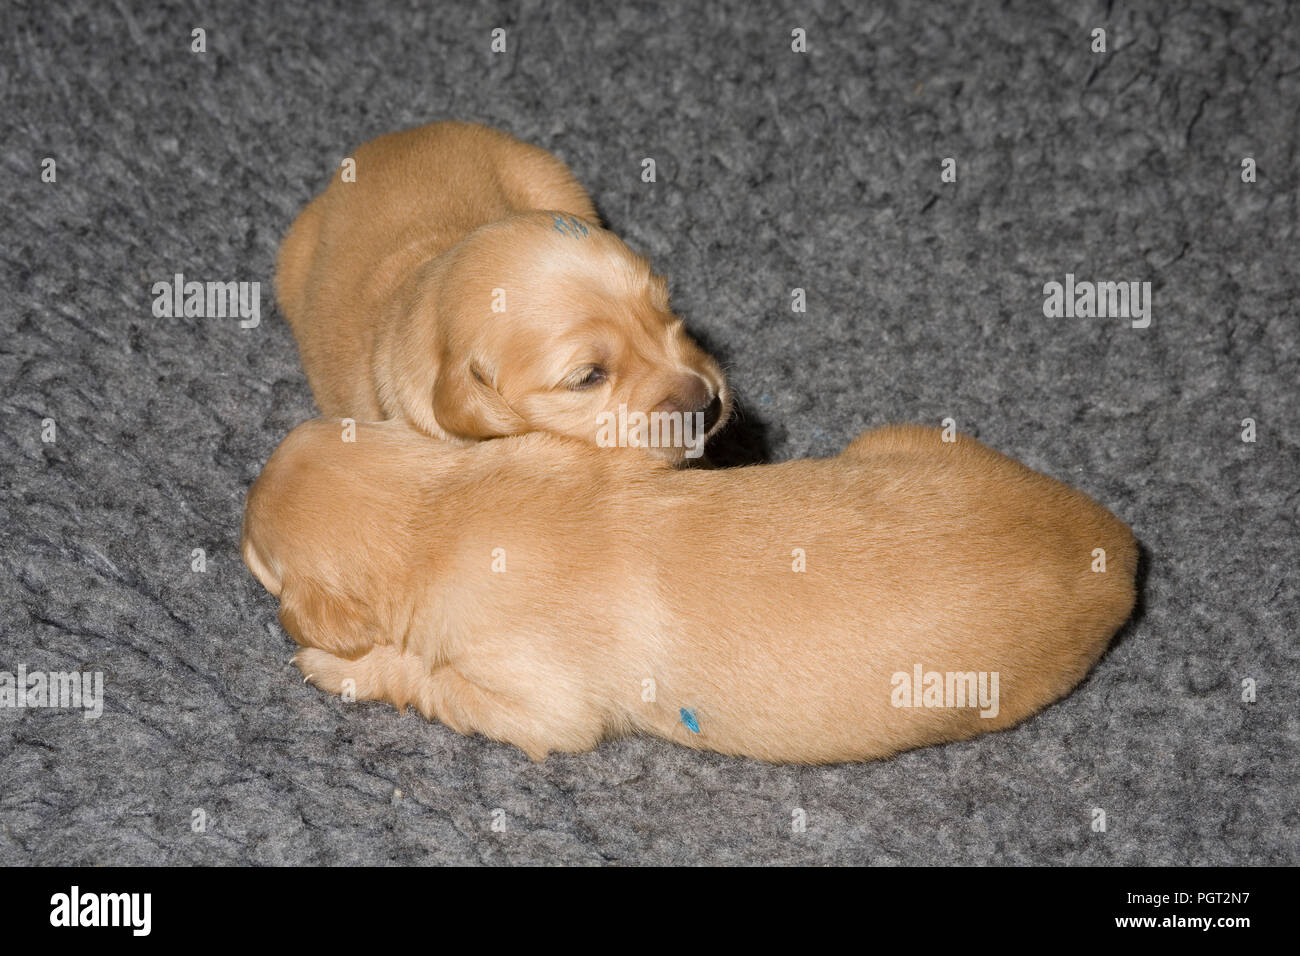 Two of the males from a litter of golden retriever puppies lying together on a polyester fur 'vet bed' rug Stock Photo